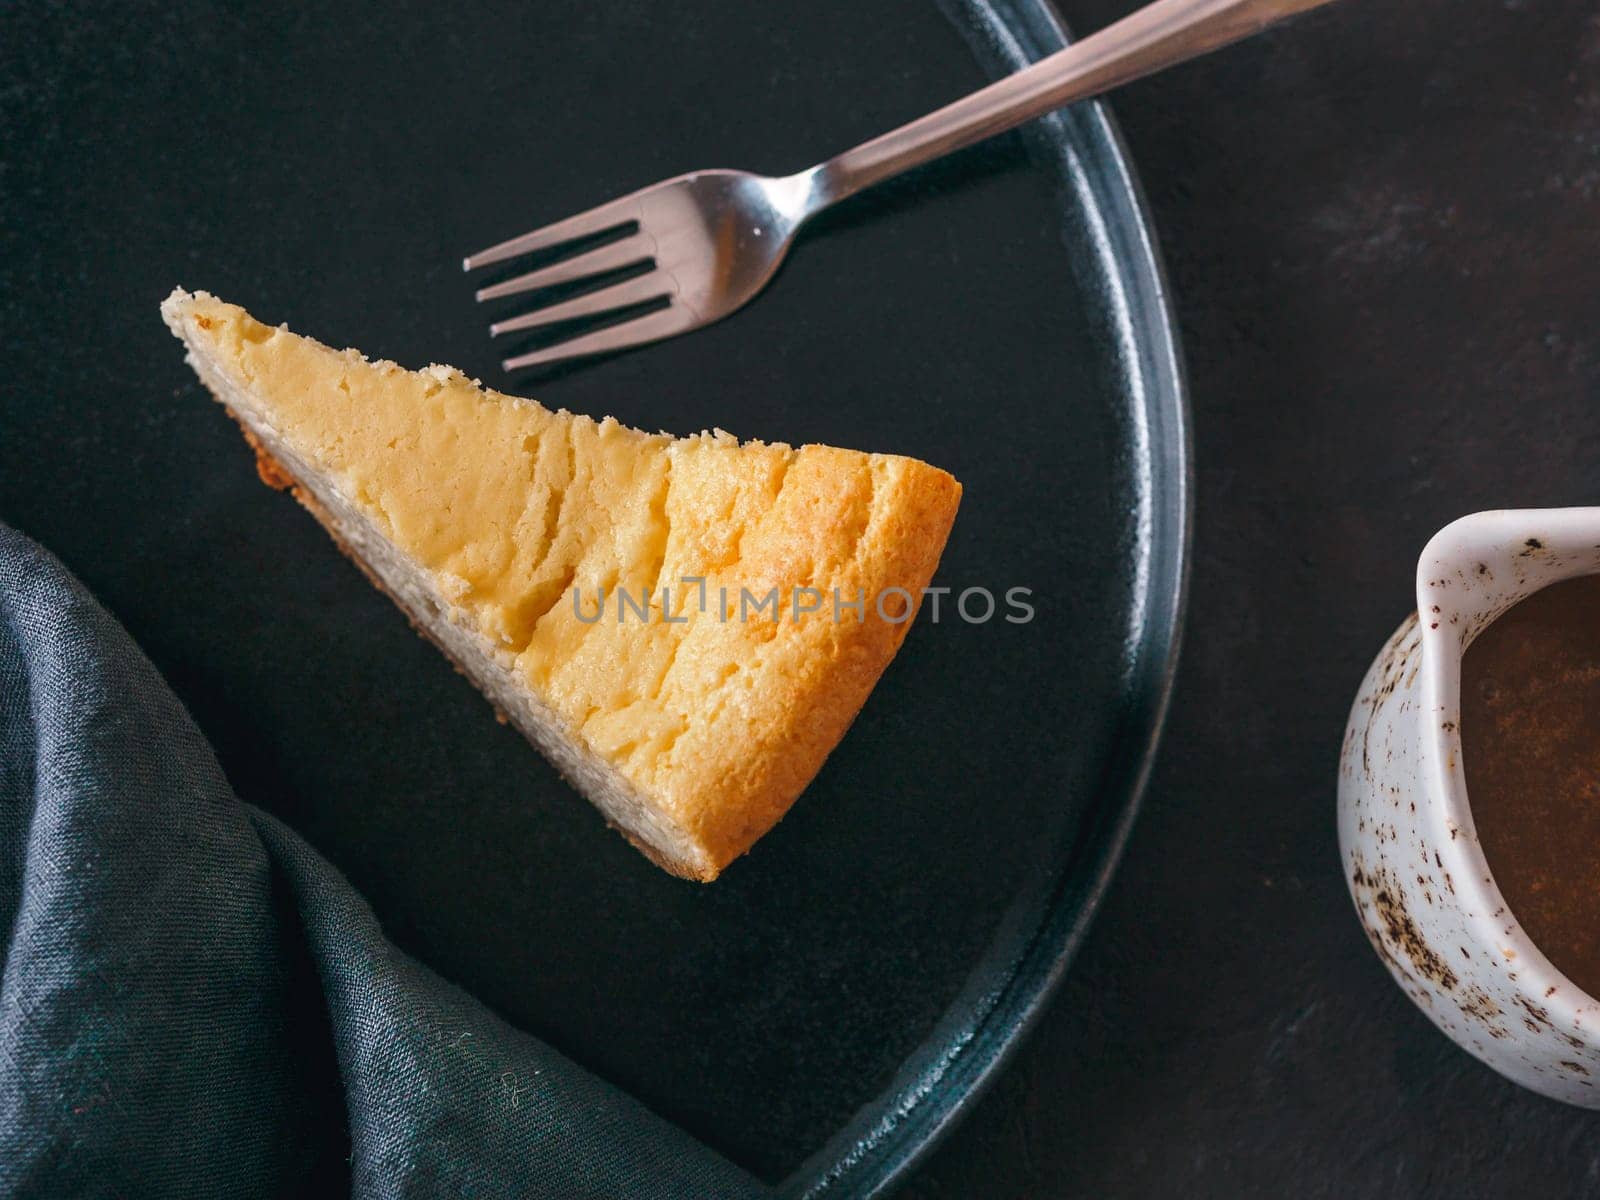 Plate with piece of cheesecake on dark background. Classic cheesecake, caramel sauce and dessert forks. Top view or flat lay.